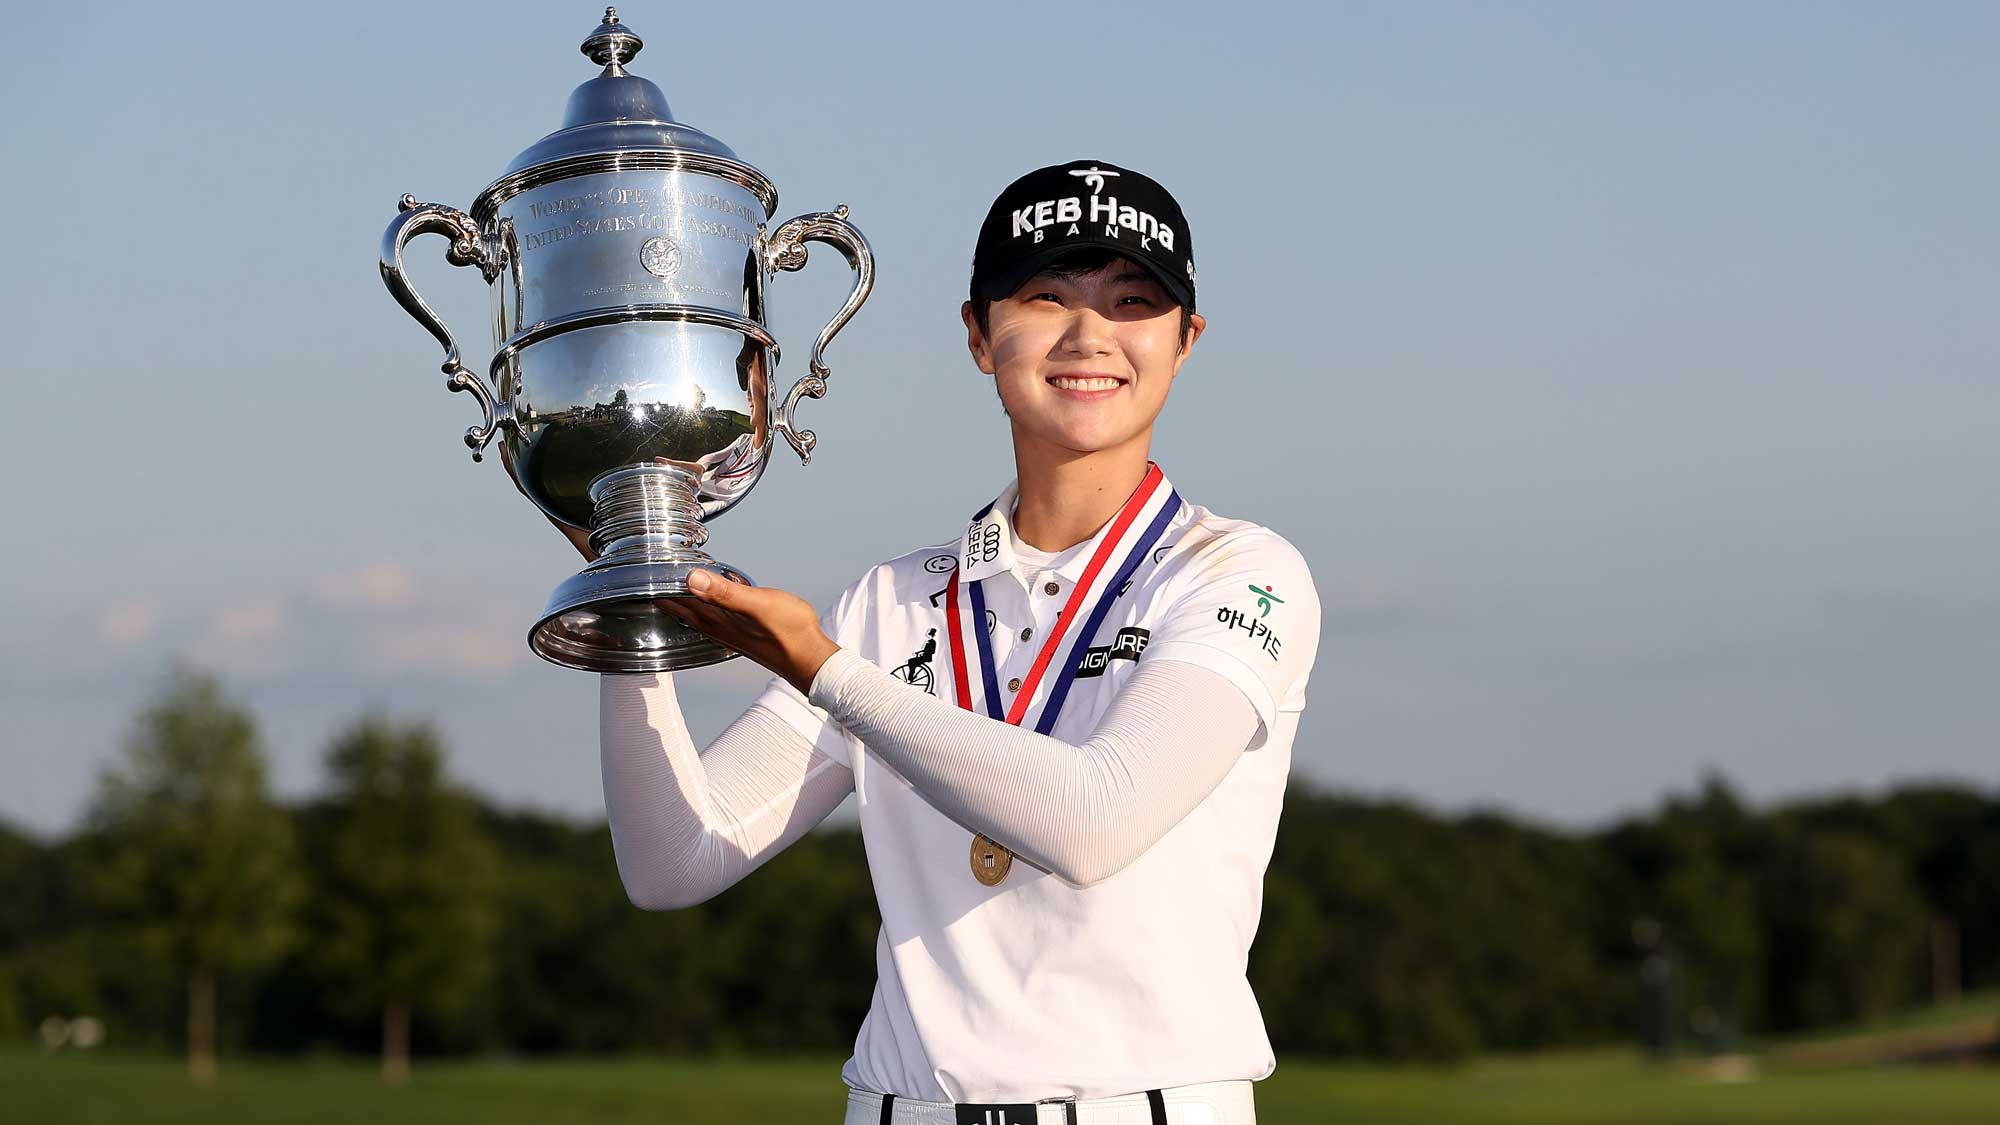 Sung Hyun Park of Korea poses with the trophy afer the final round of the U.S. Women's Open